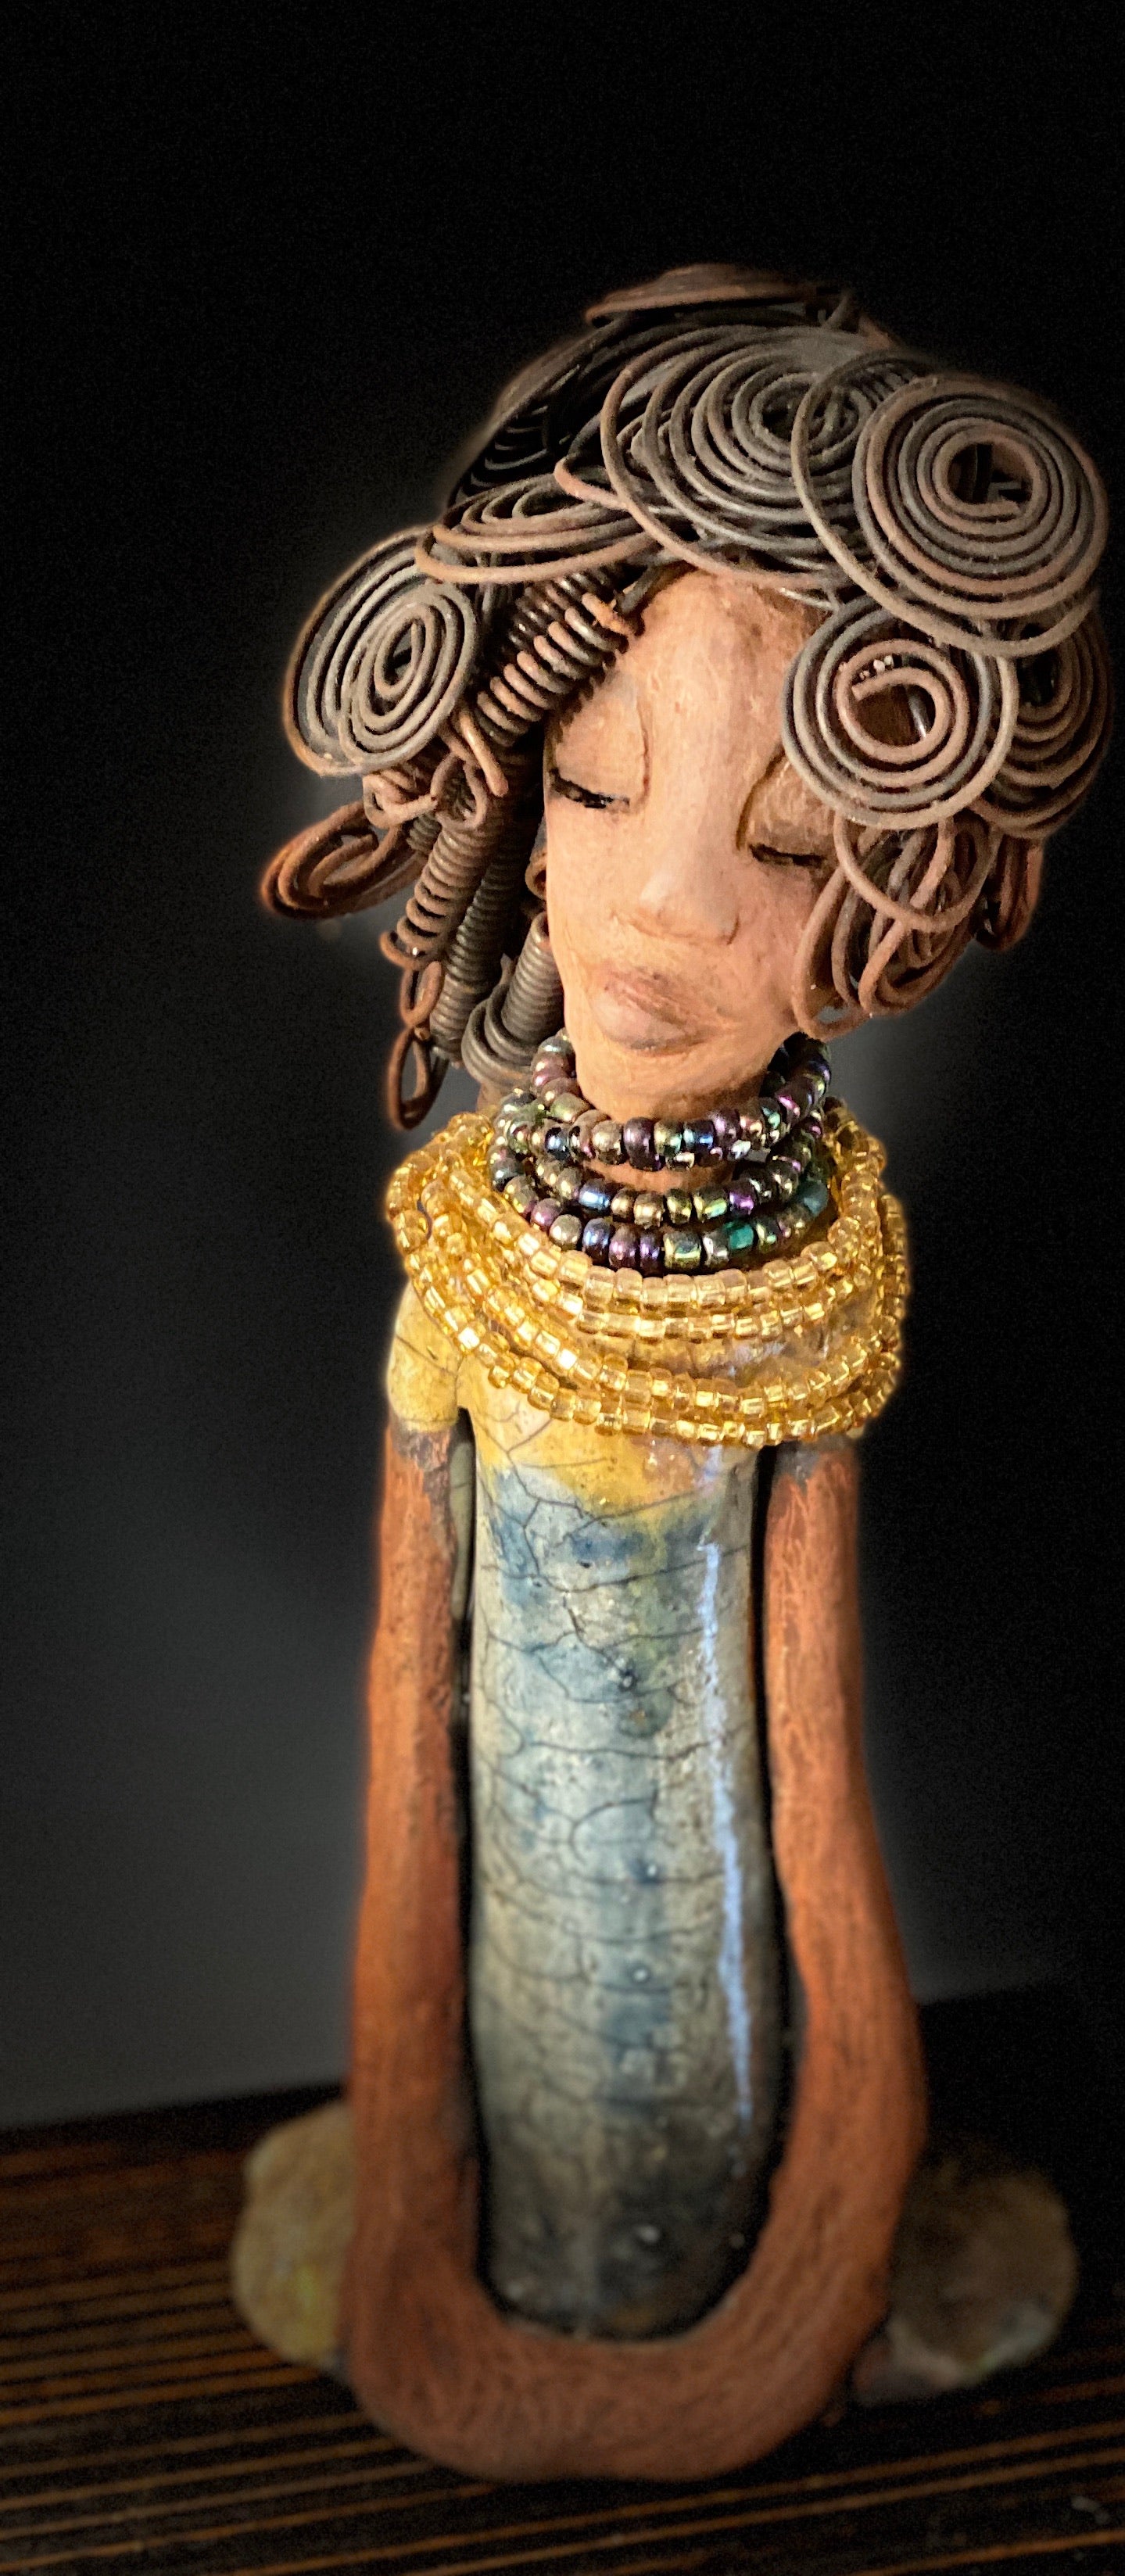 Sophia knows but will never tell! Sophia stands 10.5" x 4" x 3" and weighs 1.10 lbs. She has a  honey brown complexion with curls, coils and twisted, wire hair. Sophia wears a light blue crackle dress with a dazzling gold and multicolored beaded necklace. Yes, Sophia knows something but she will never tell. Sophia will spark a conversation of "say what" in your place.